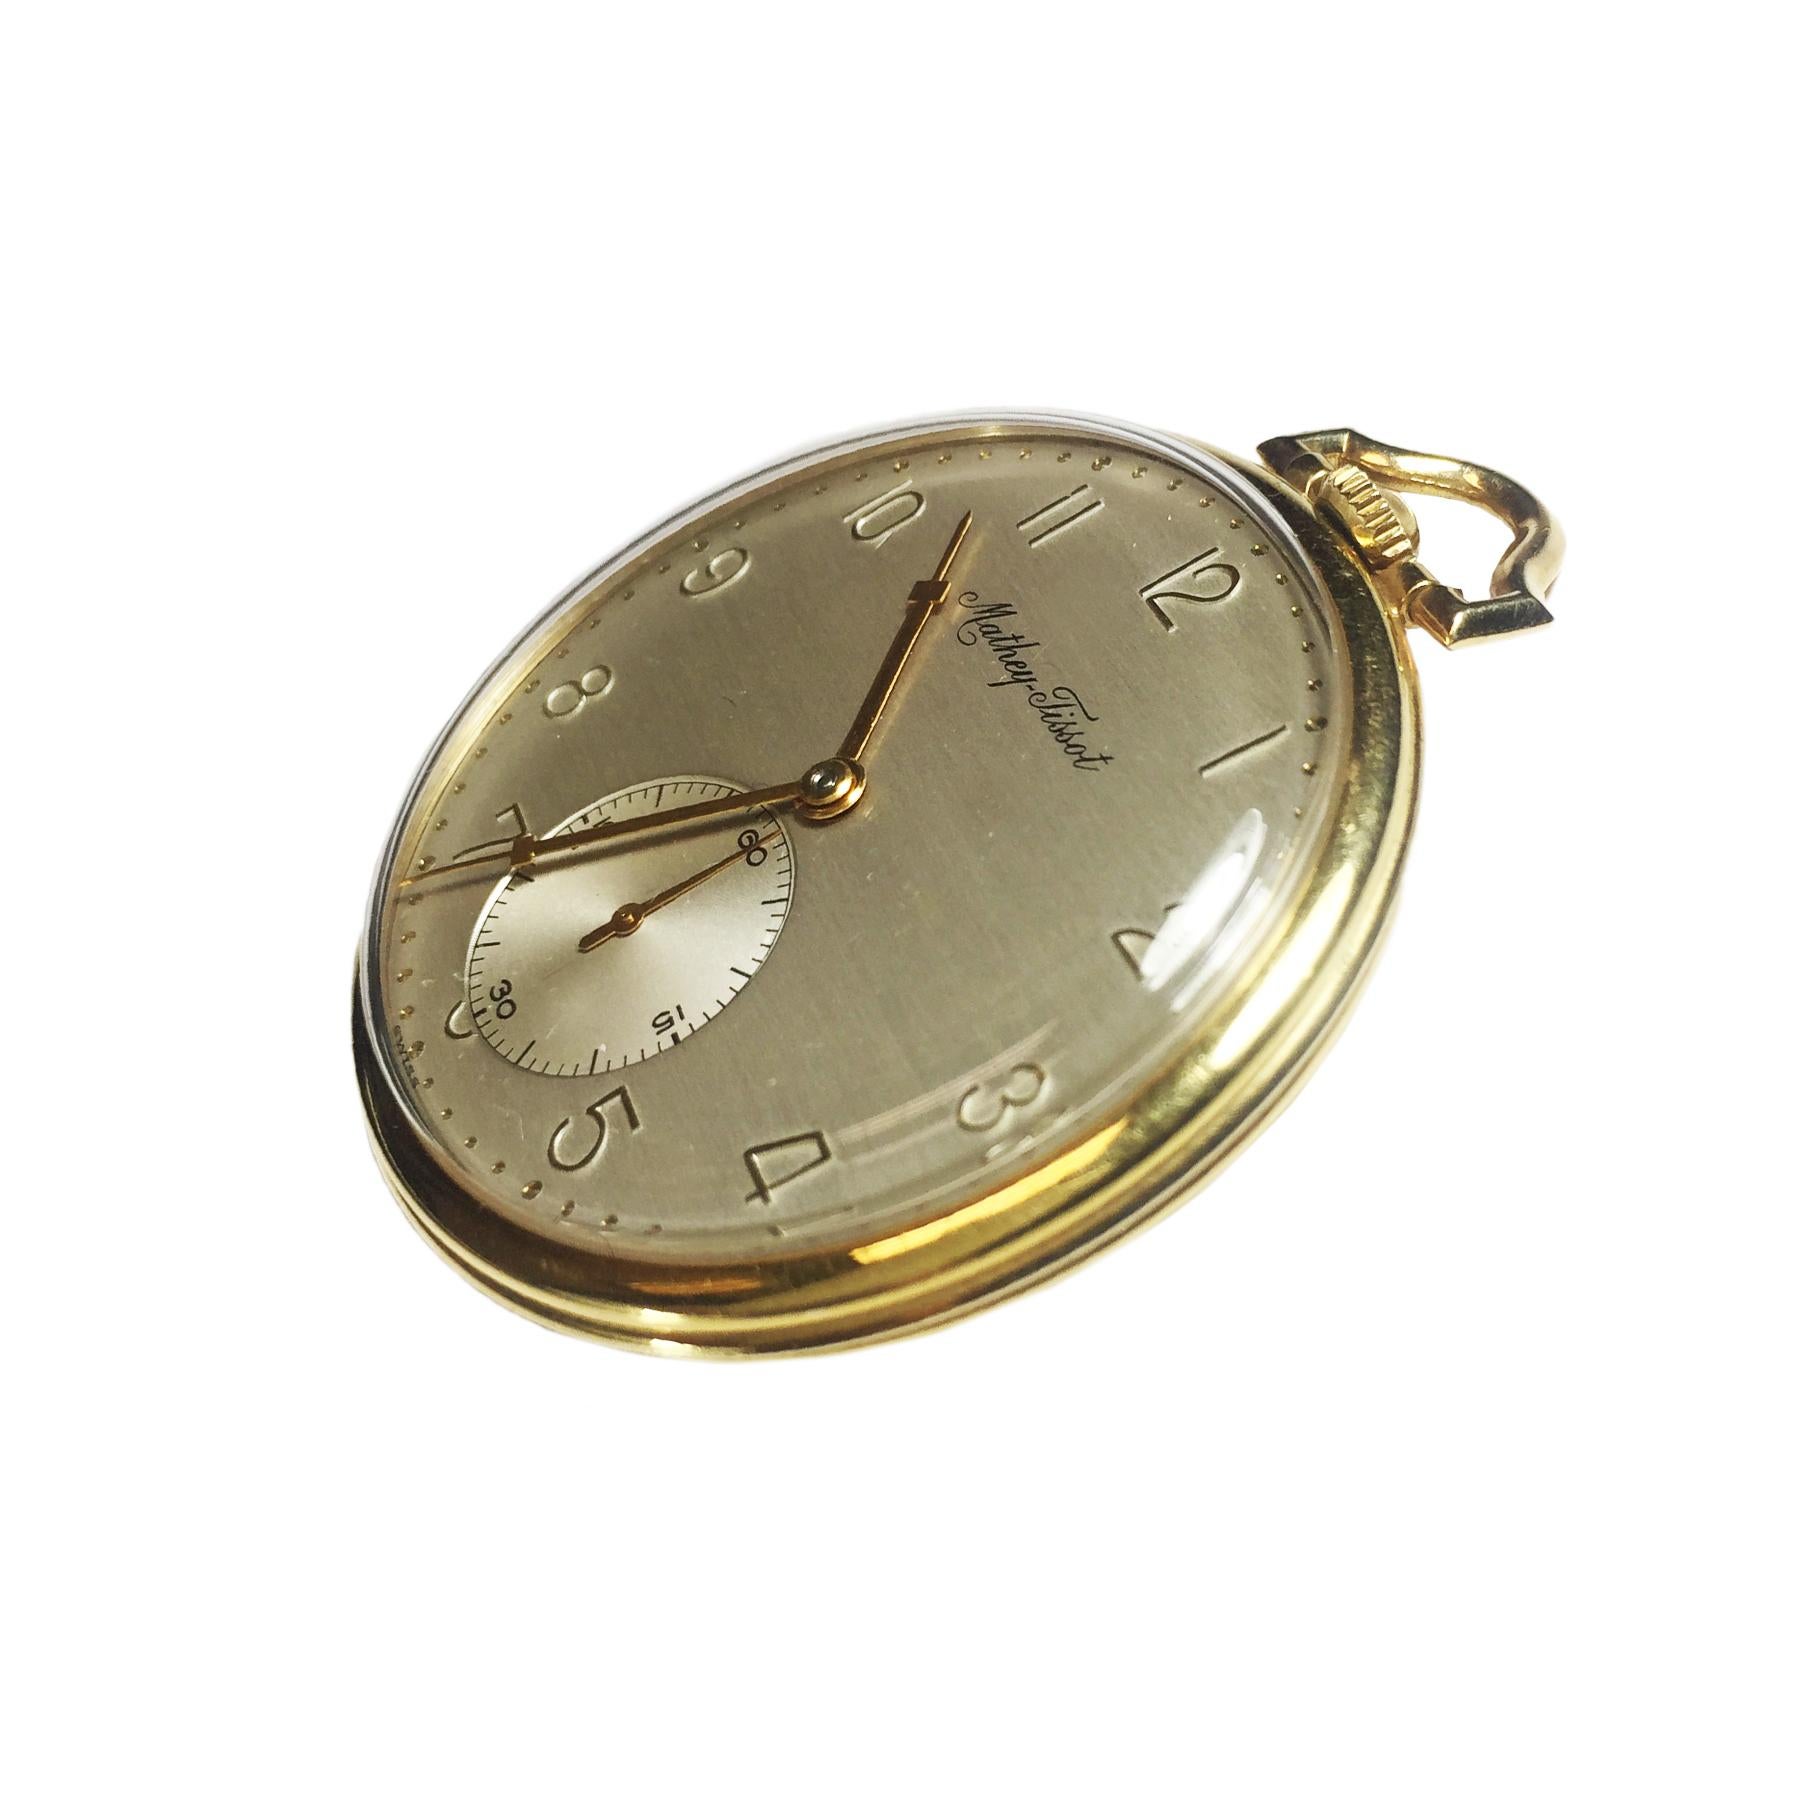 From the Estate of Comedian Jerry Lewis is this Mathey Tissot Pocket Watch, 42 MM 14K yellow Gold 3 piece case, 17 Jewel manual wind, Nickel lever movement,  silvered dial with raised Gold Markers and a sub seconds chapter.  The Case back is